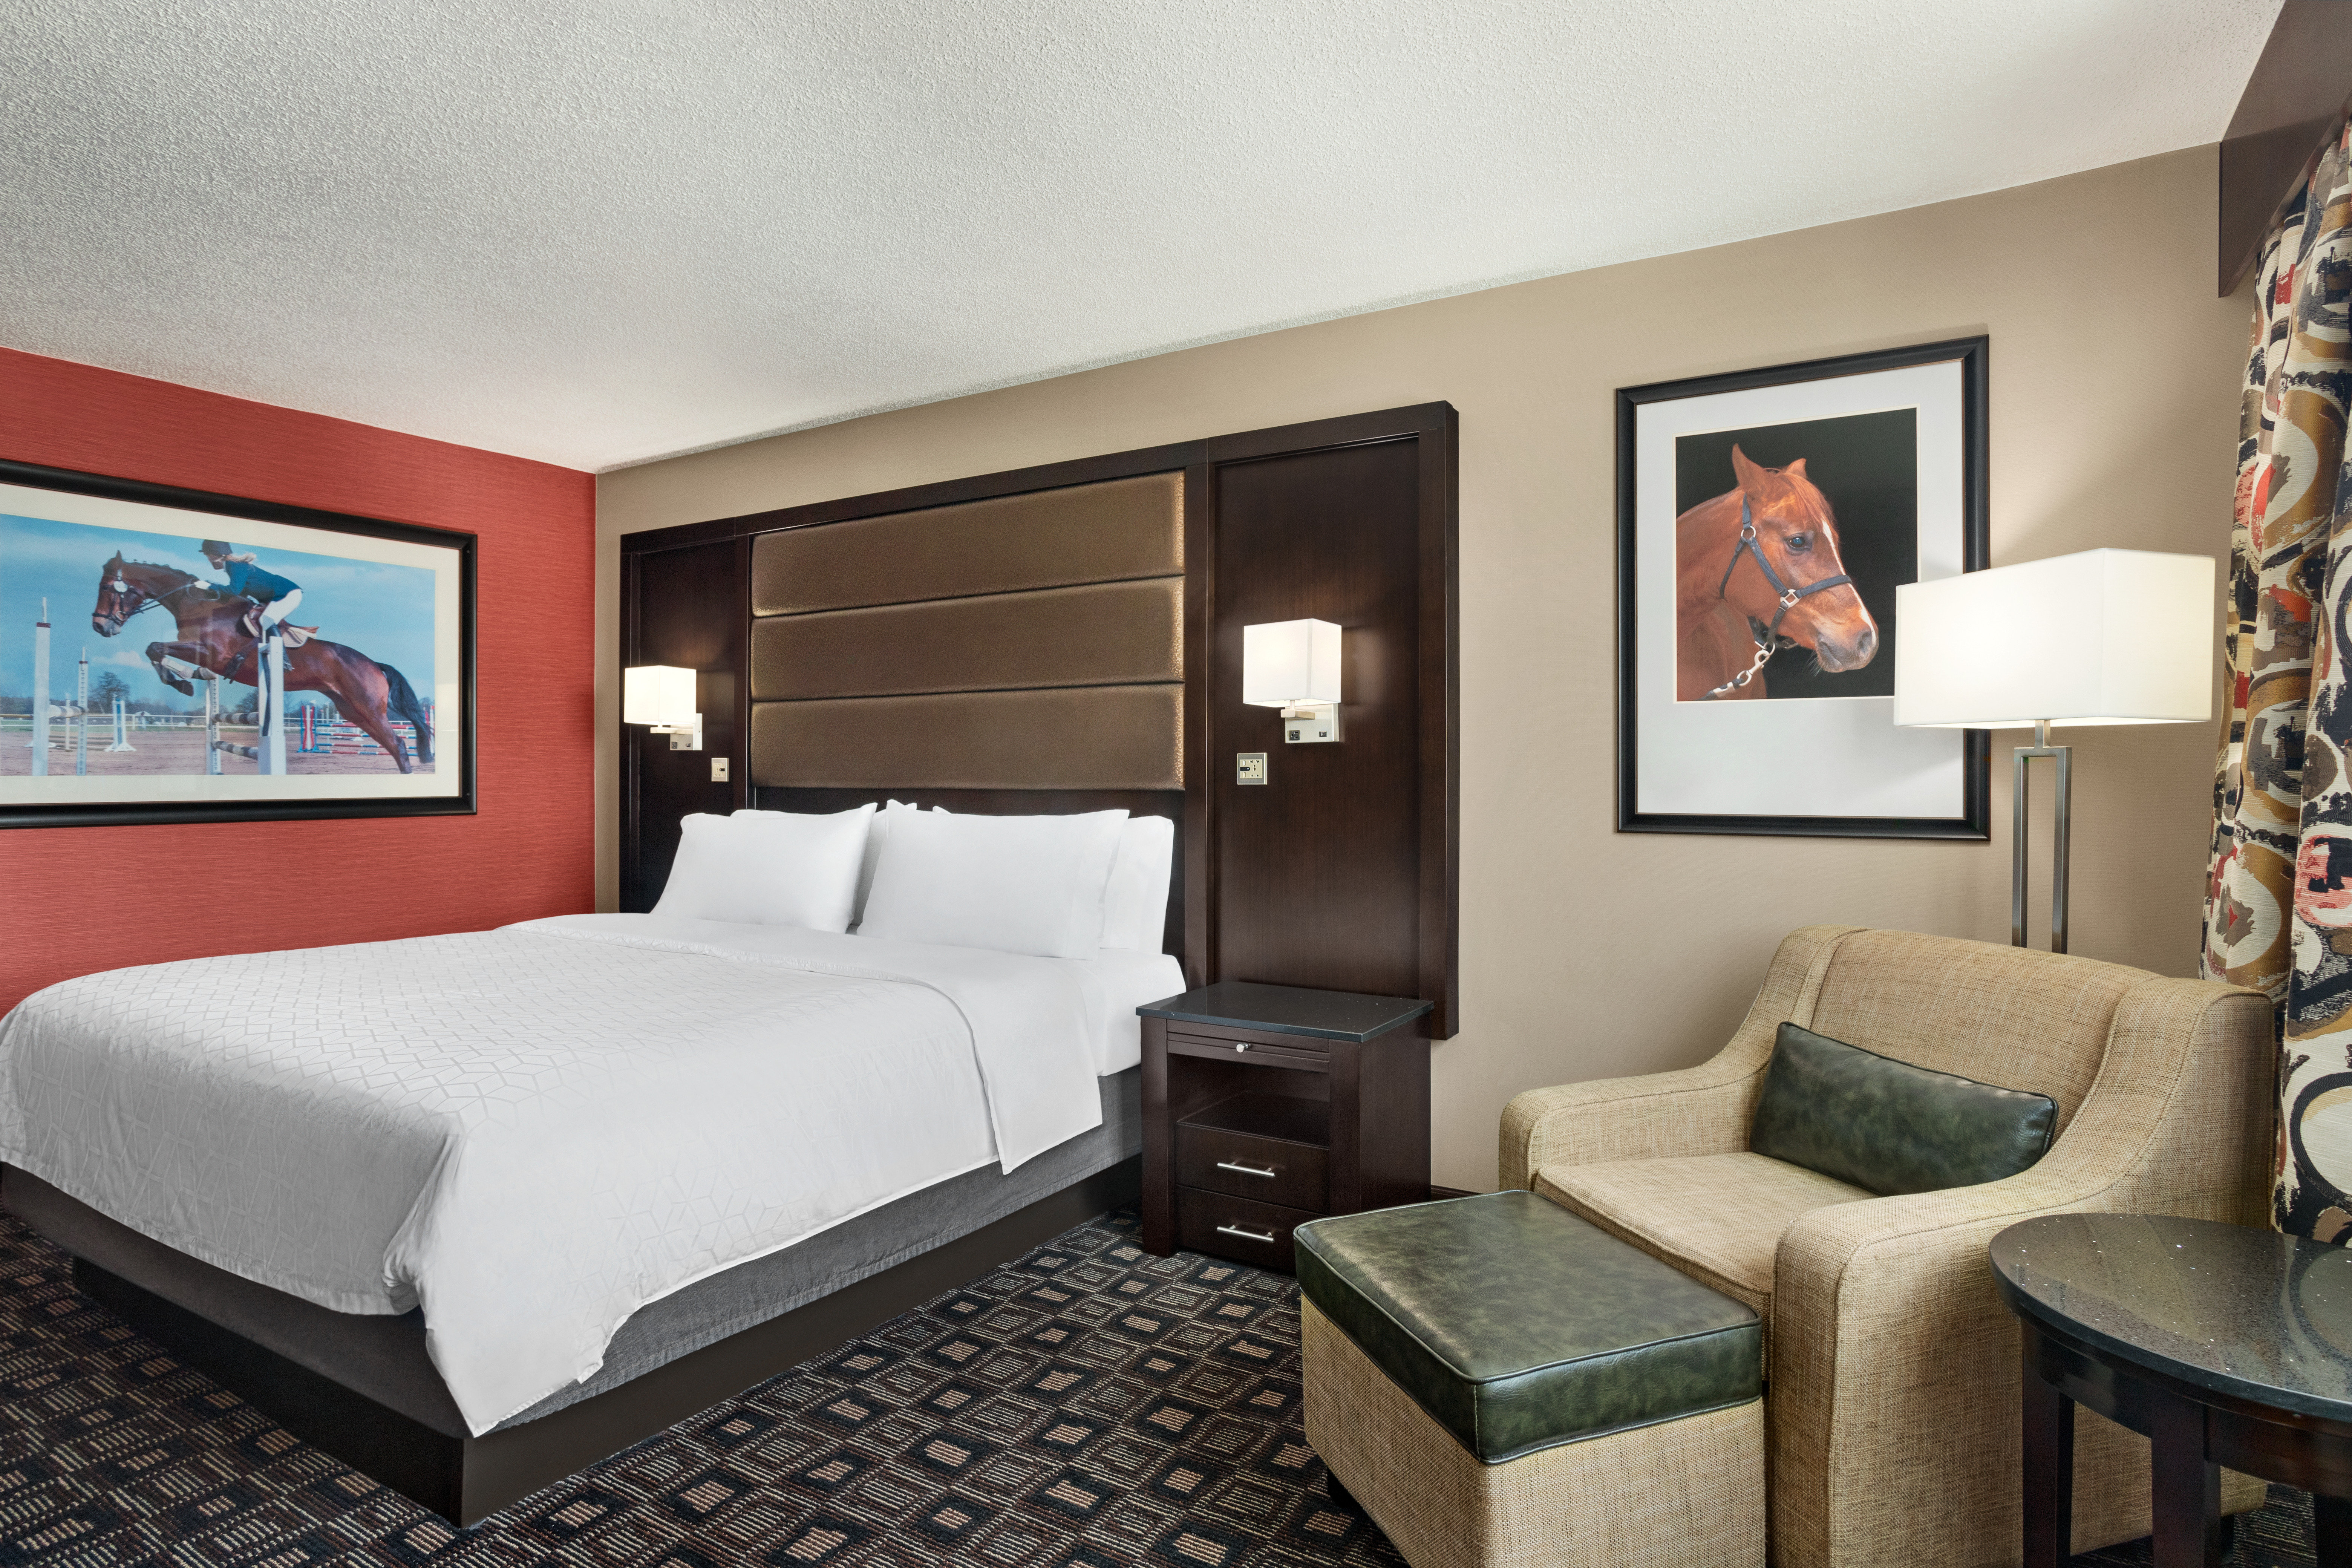 The ideal room for both business and leisure travelers.